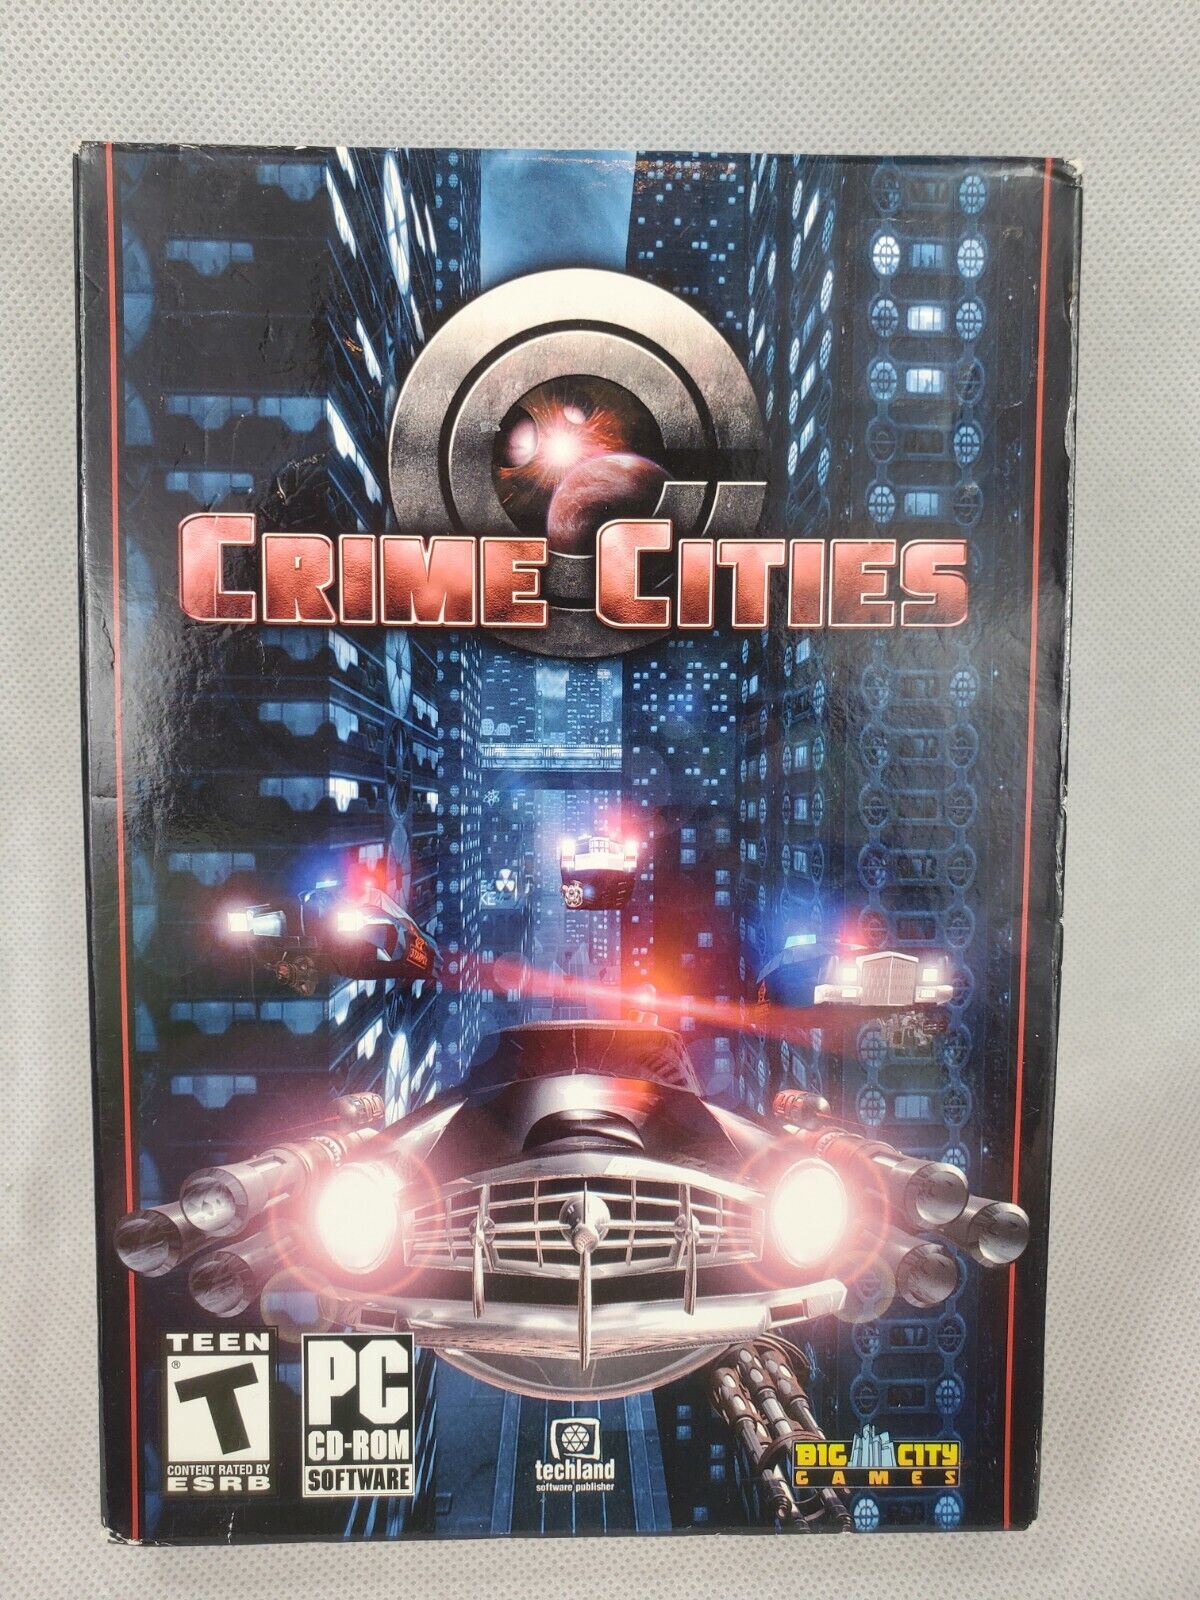 Crime Cities PC 2003 CD-ROM PC Computer Game New and Sealed in Box